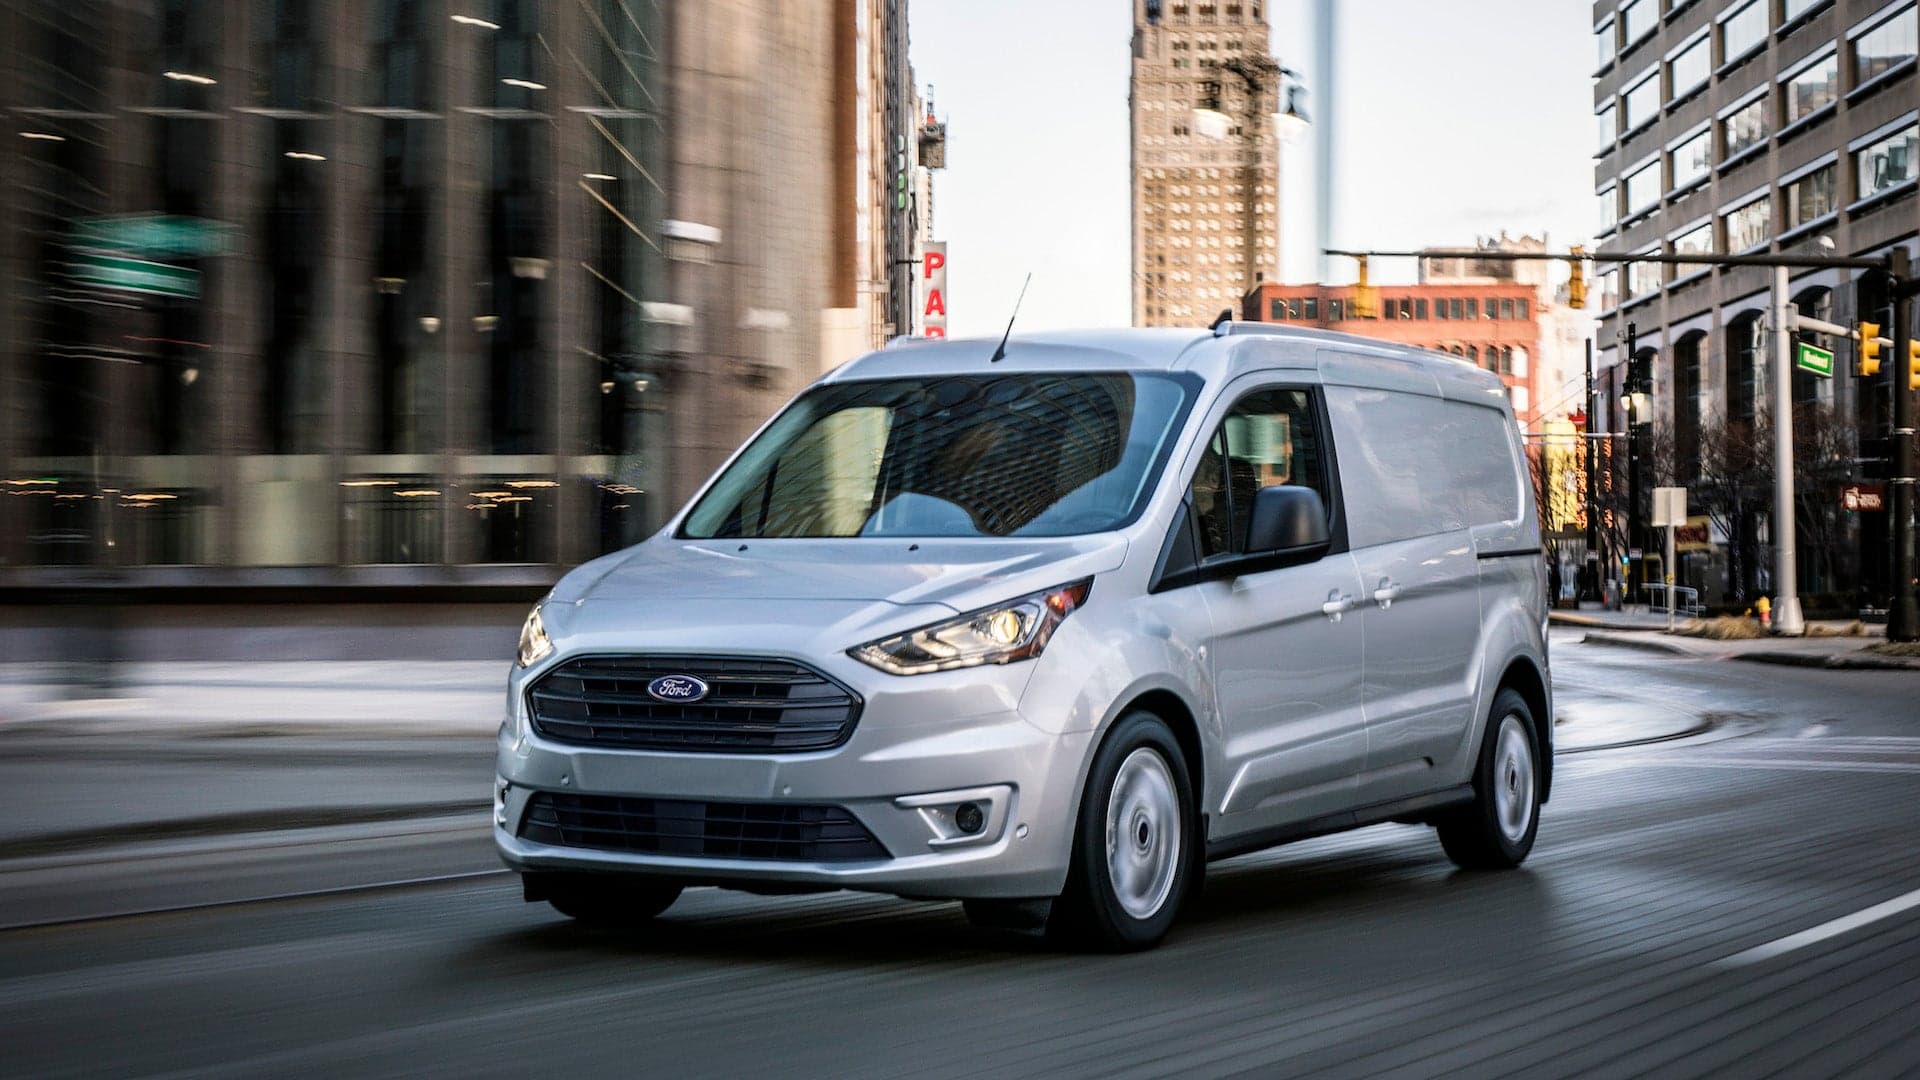 Ford Unveils the Transit Connect Cargo Van at the Work Truck Show